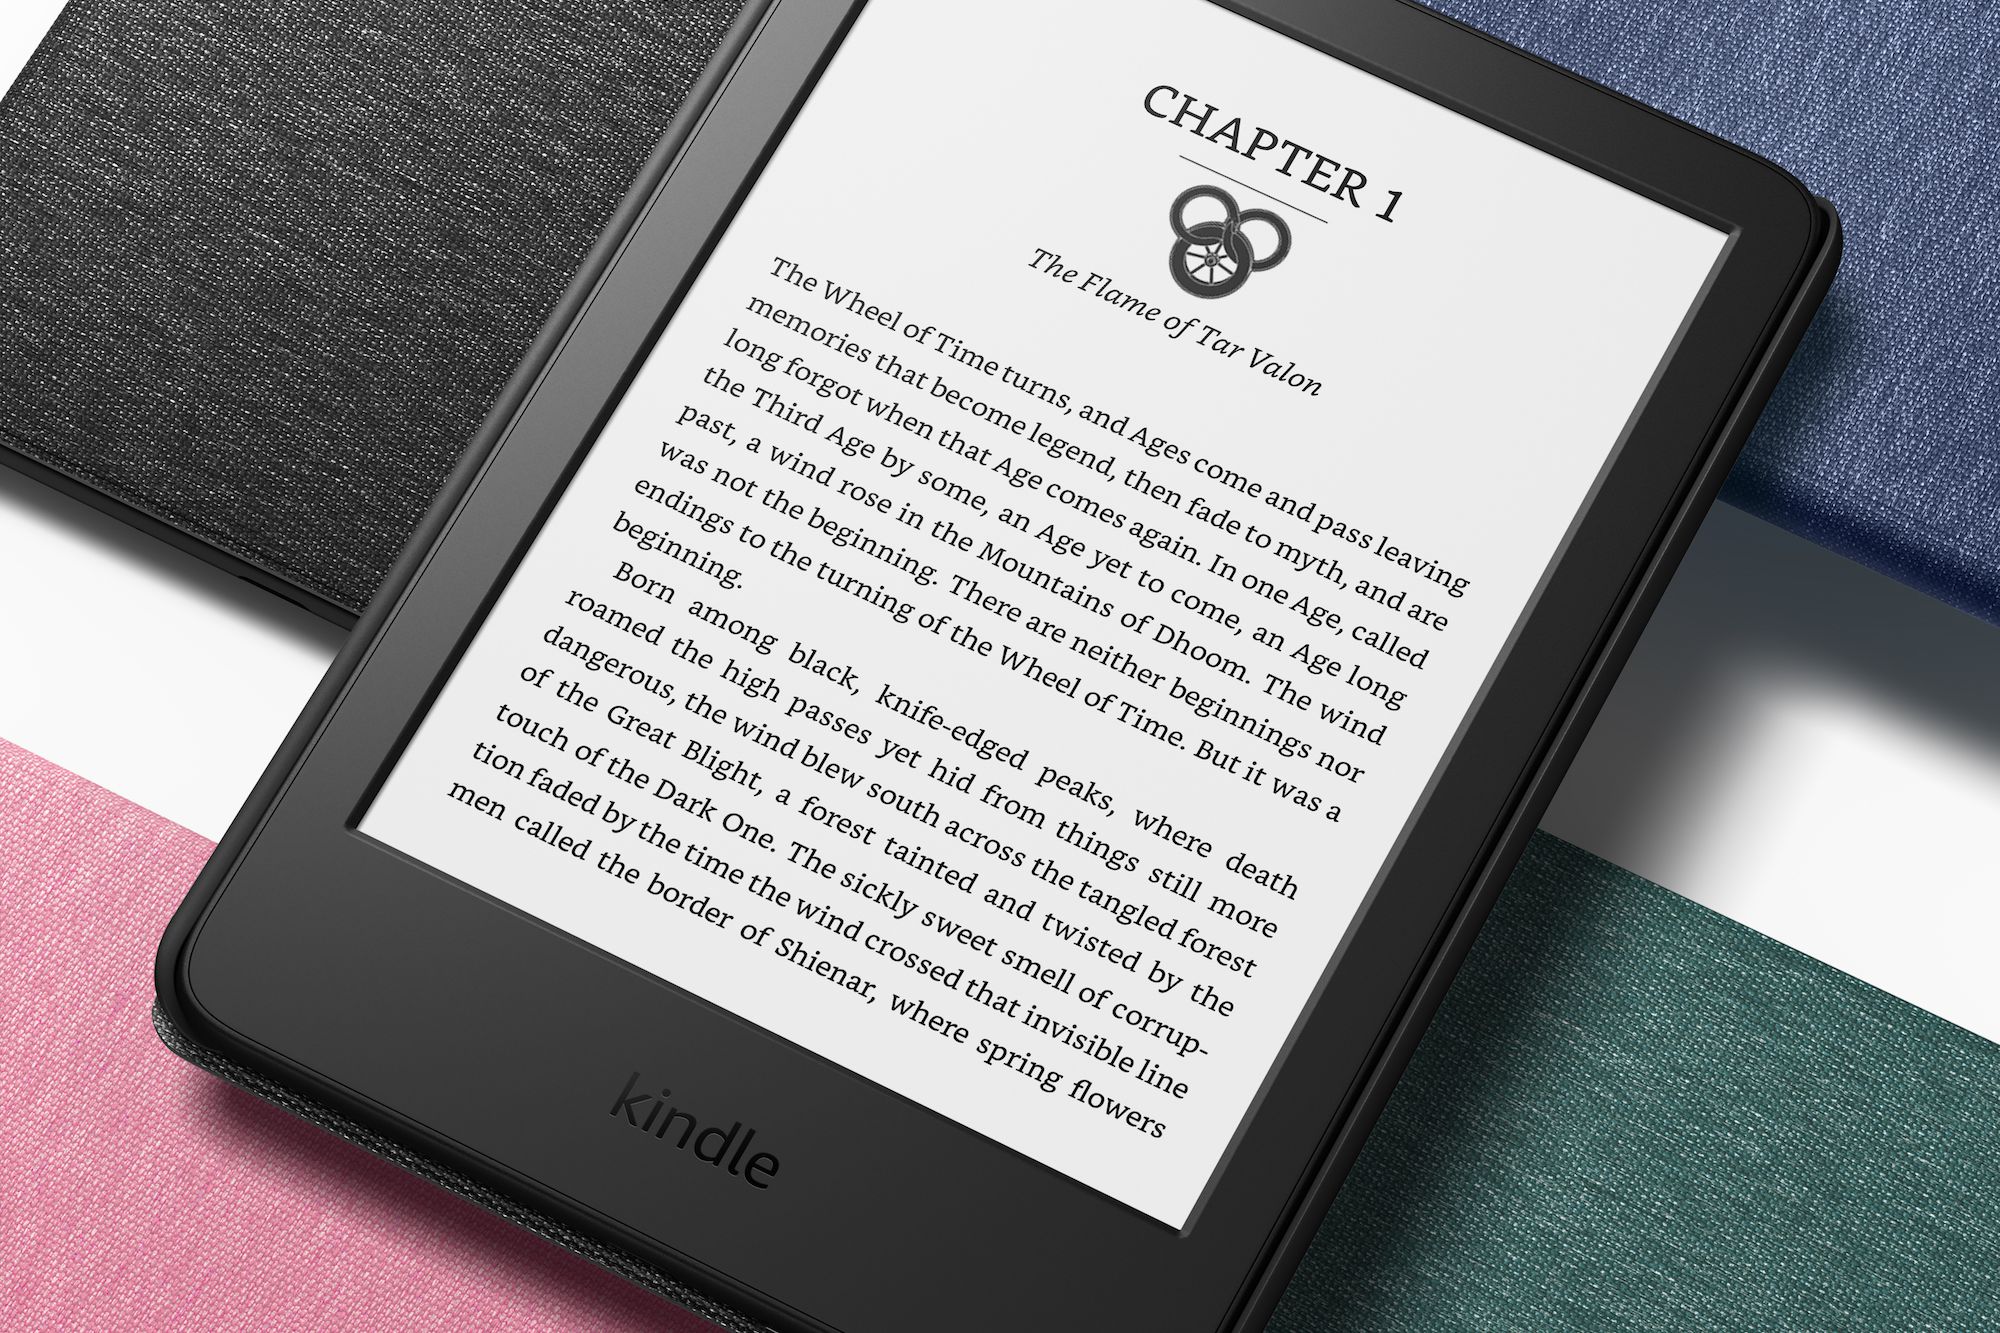 The new  Kindle has USB-C charging and an upgraded screen - The Verge